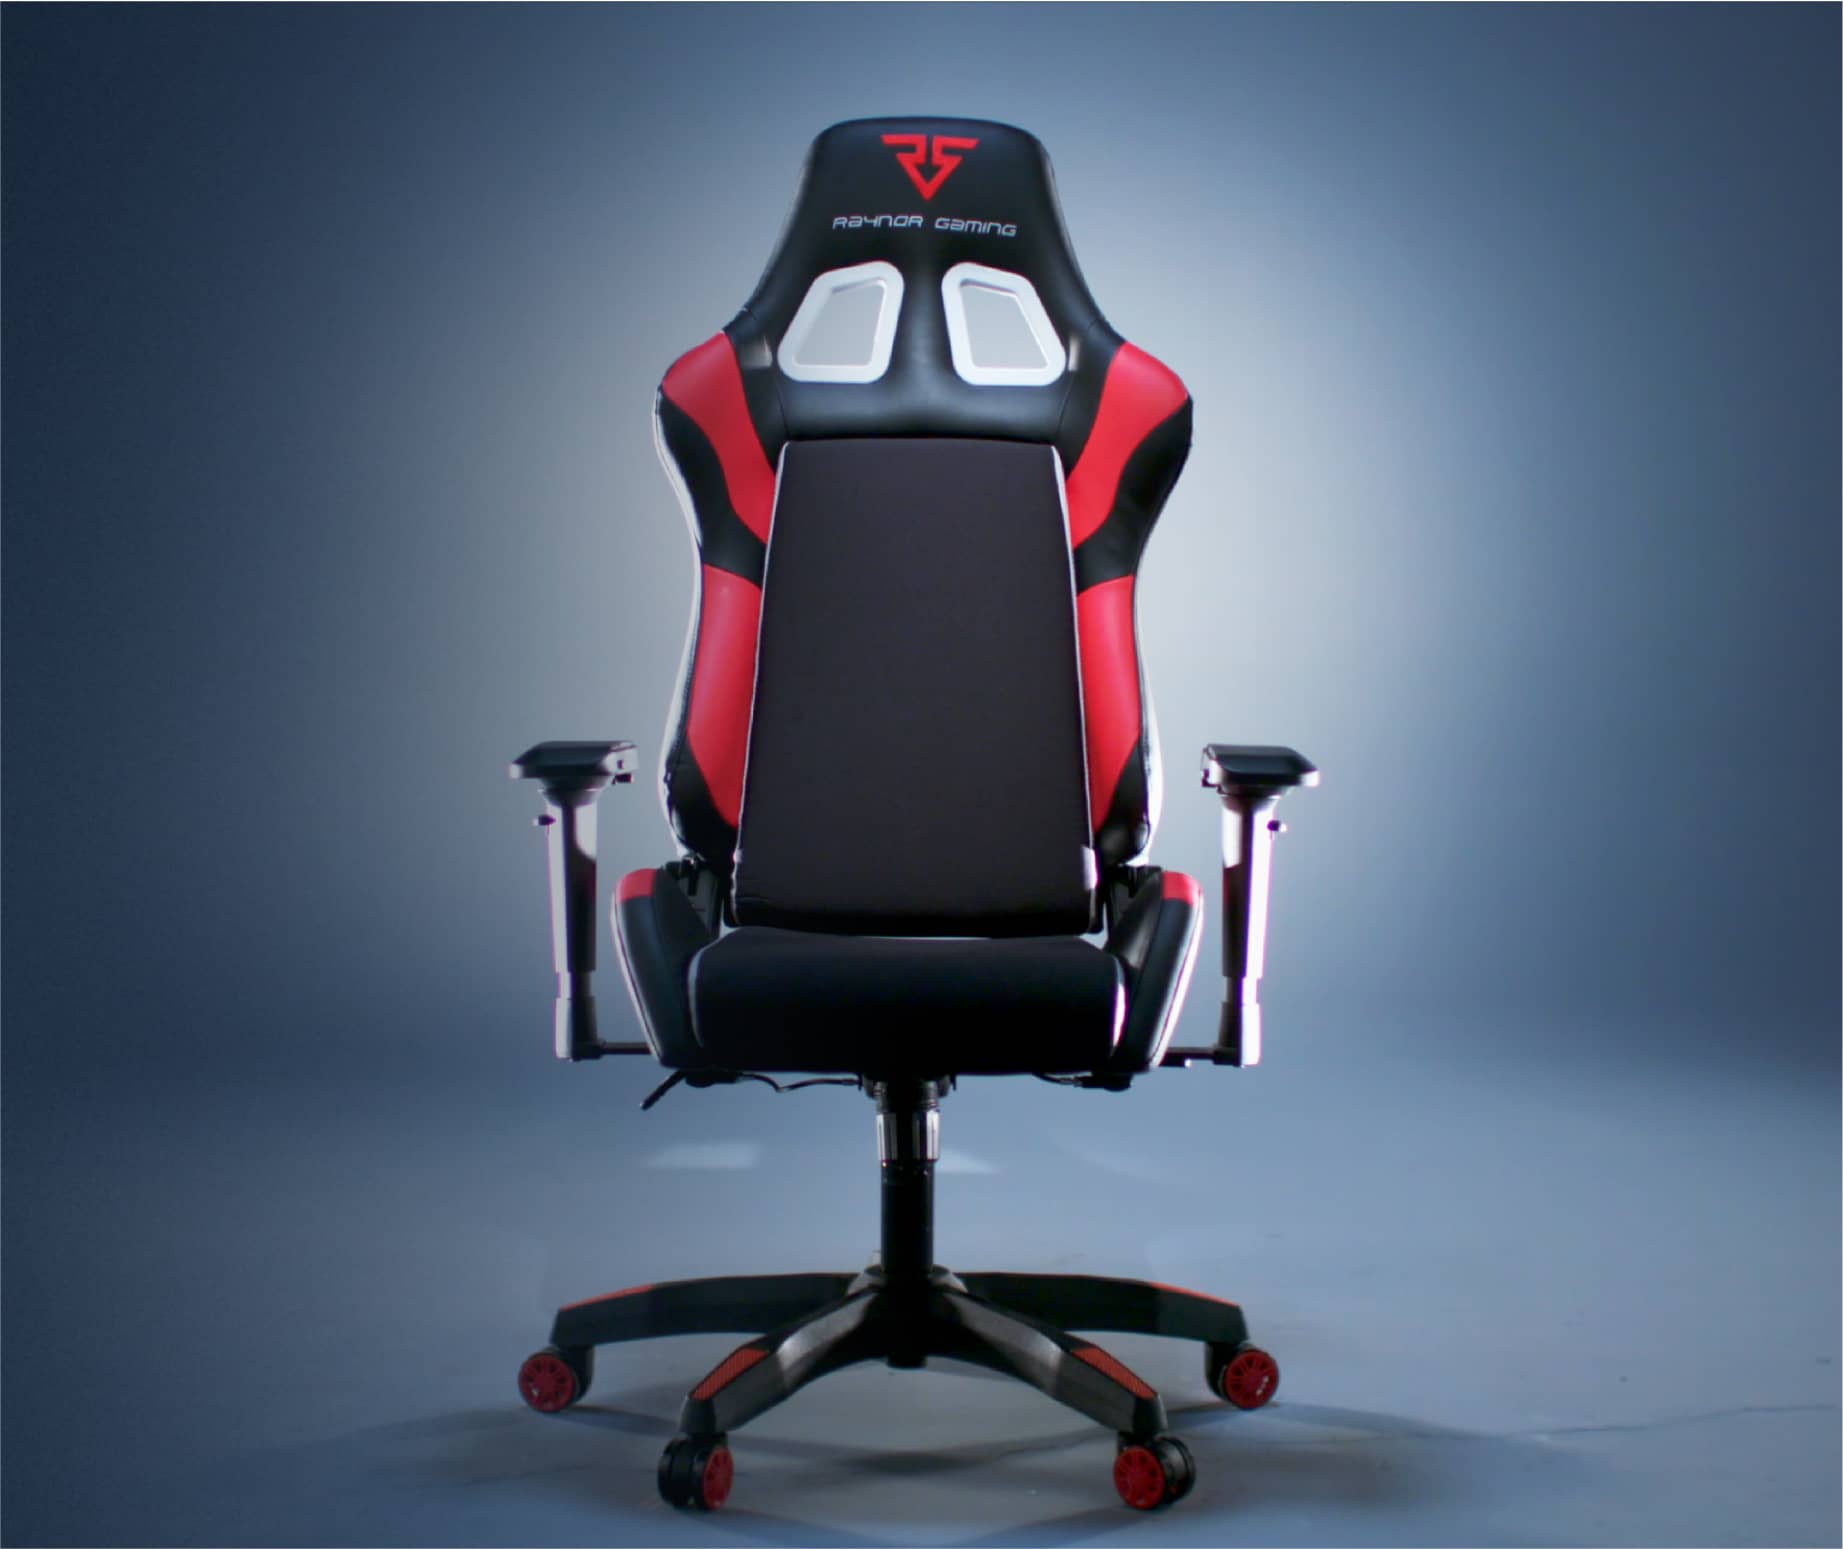 Raynor Gaming - The most advanced gaming chairs around